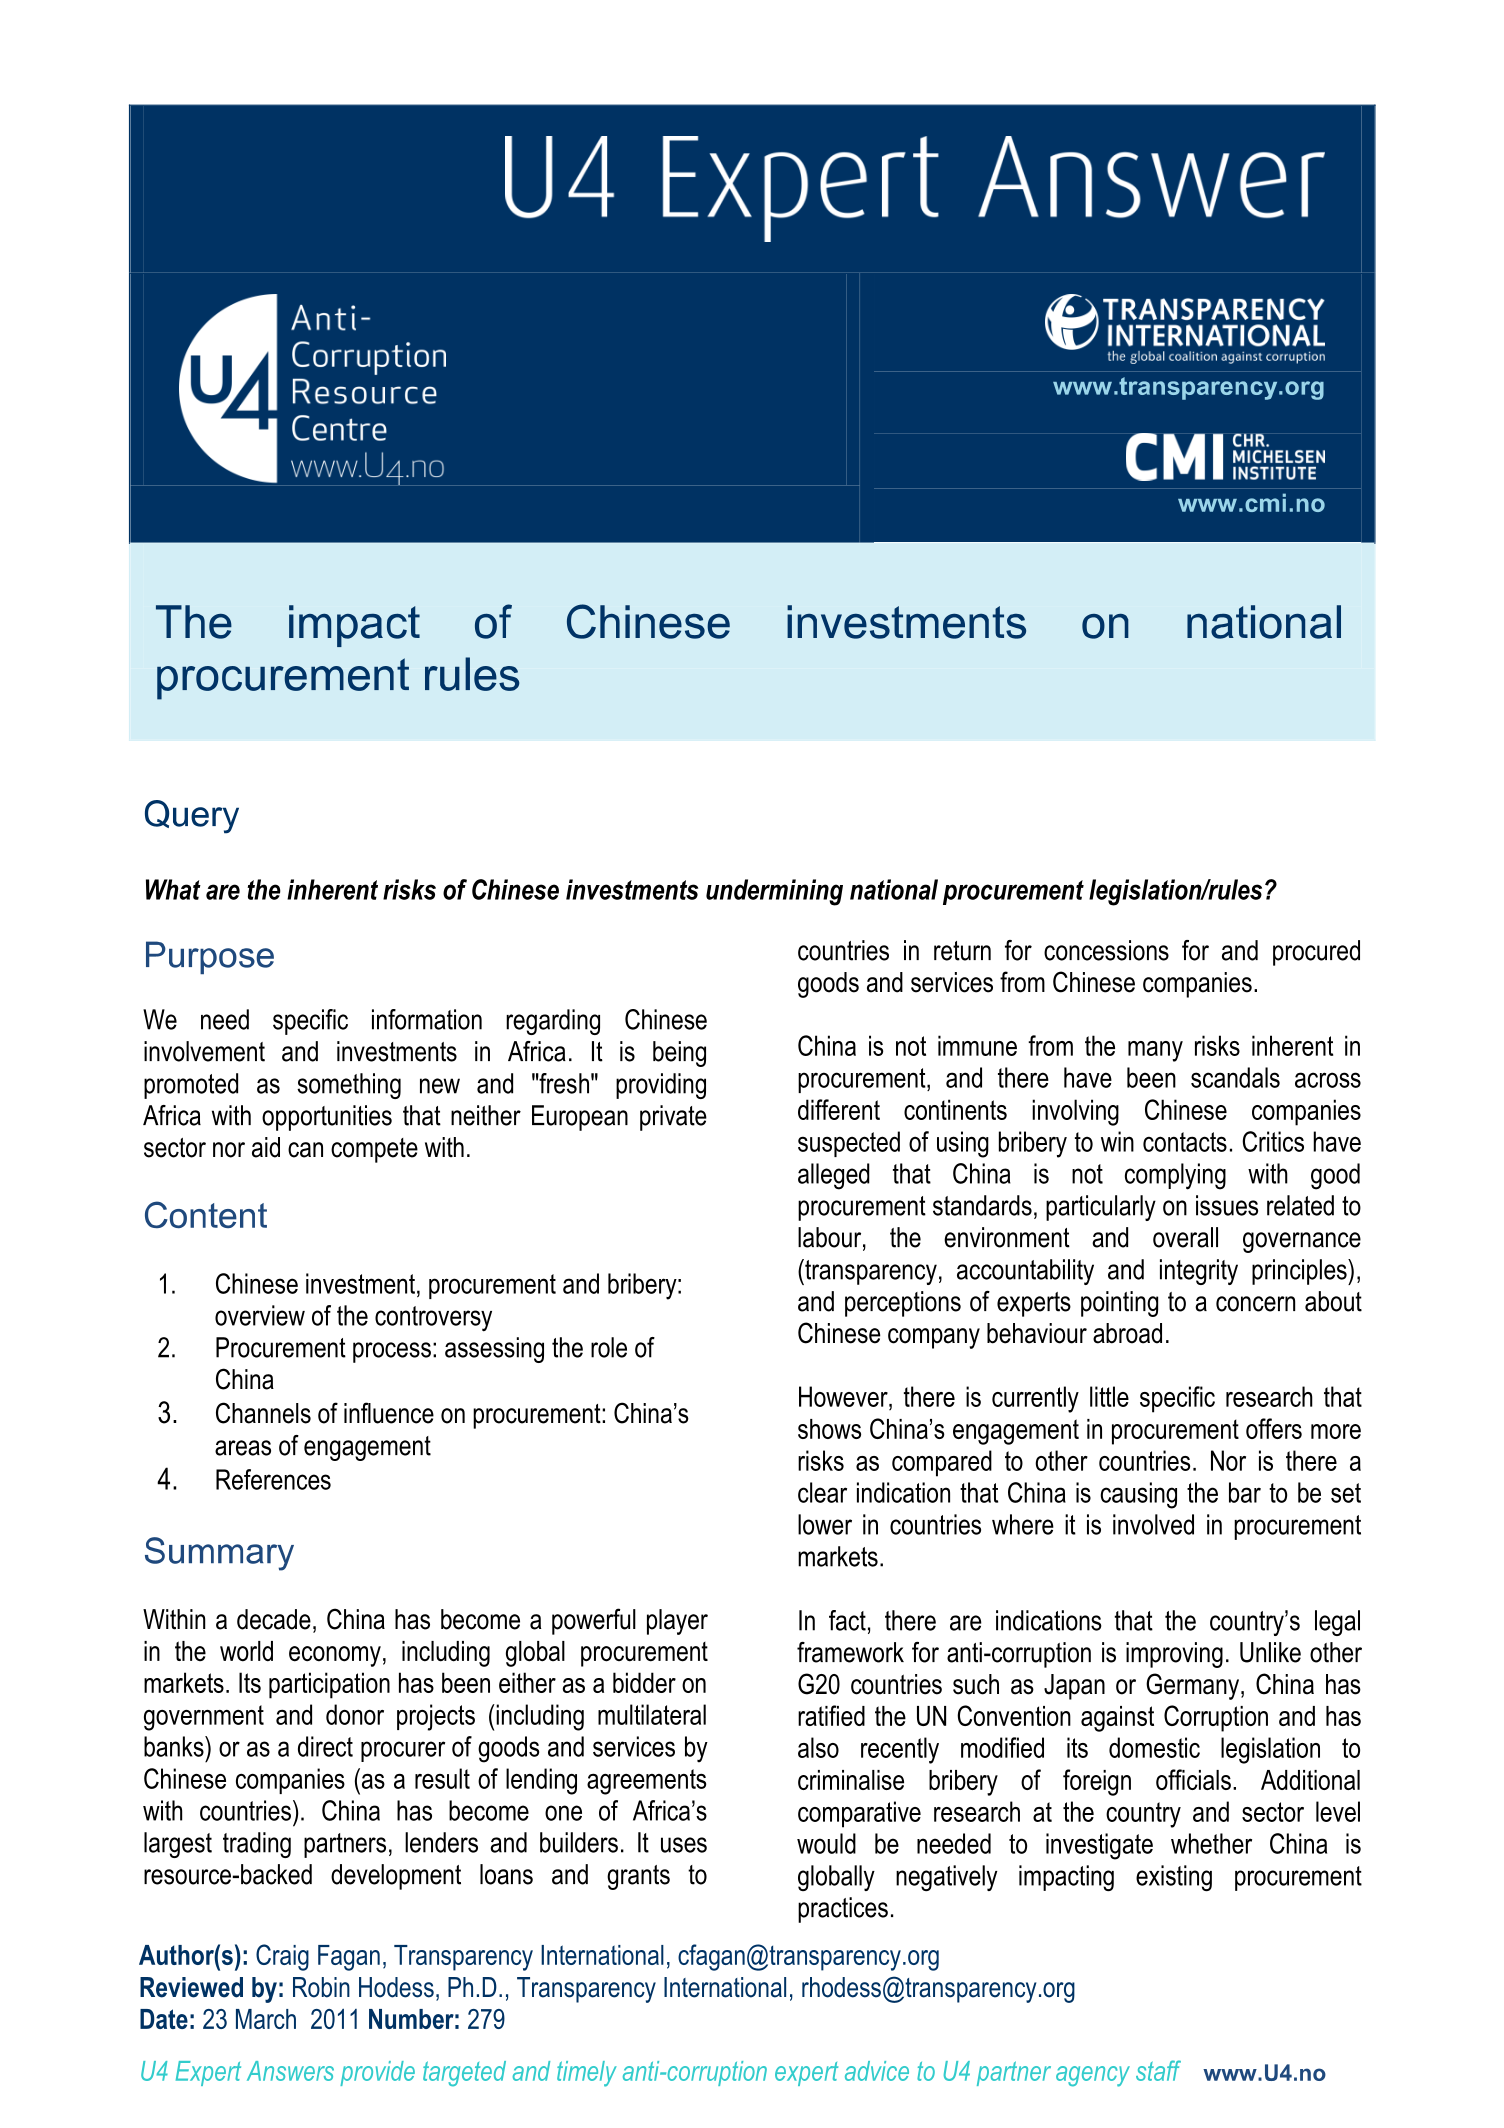 The impact of Chinese investments on national procurement rules